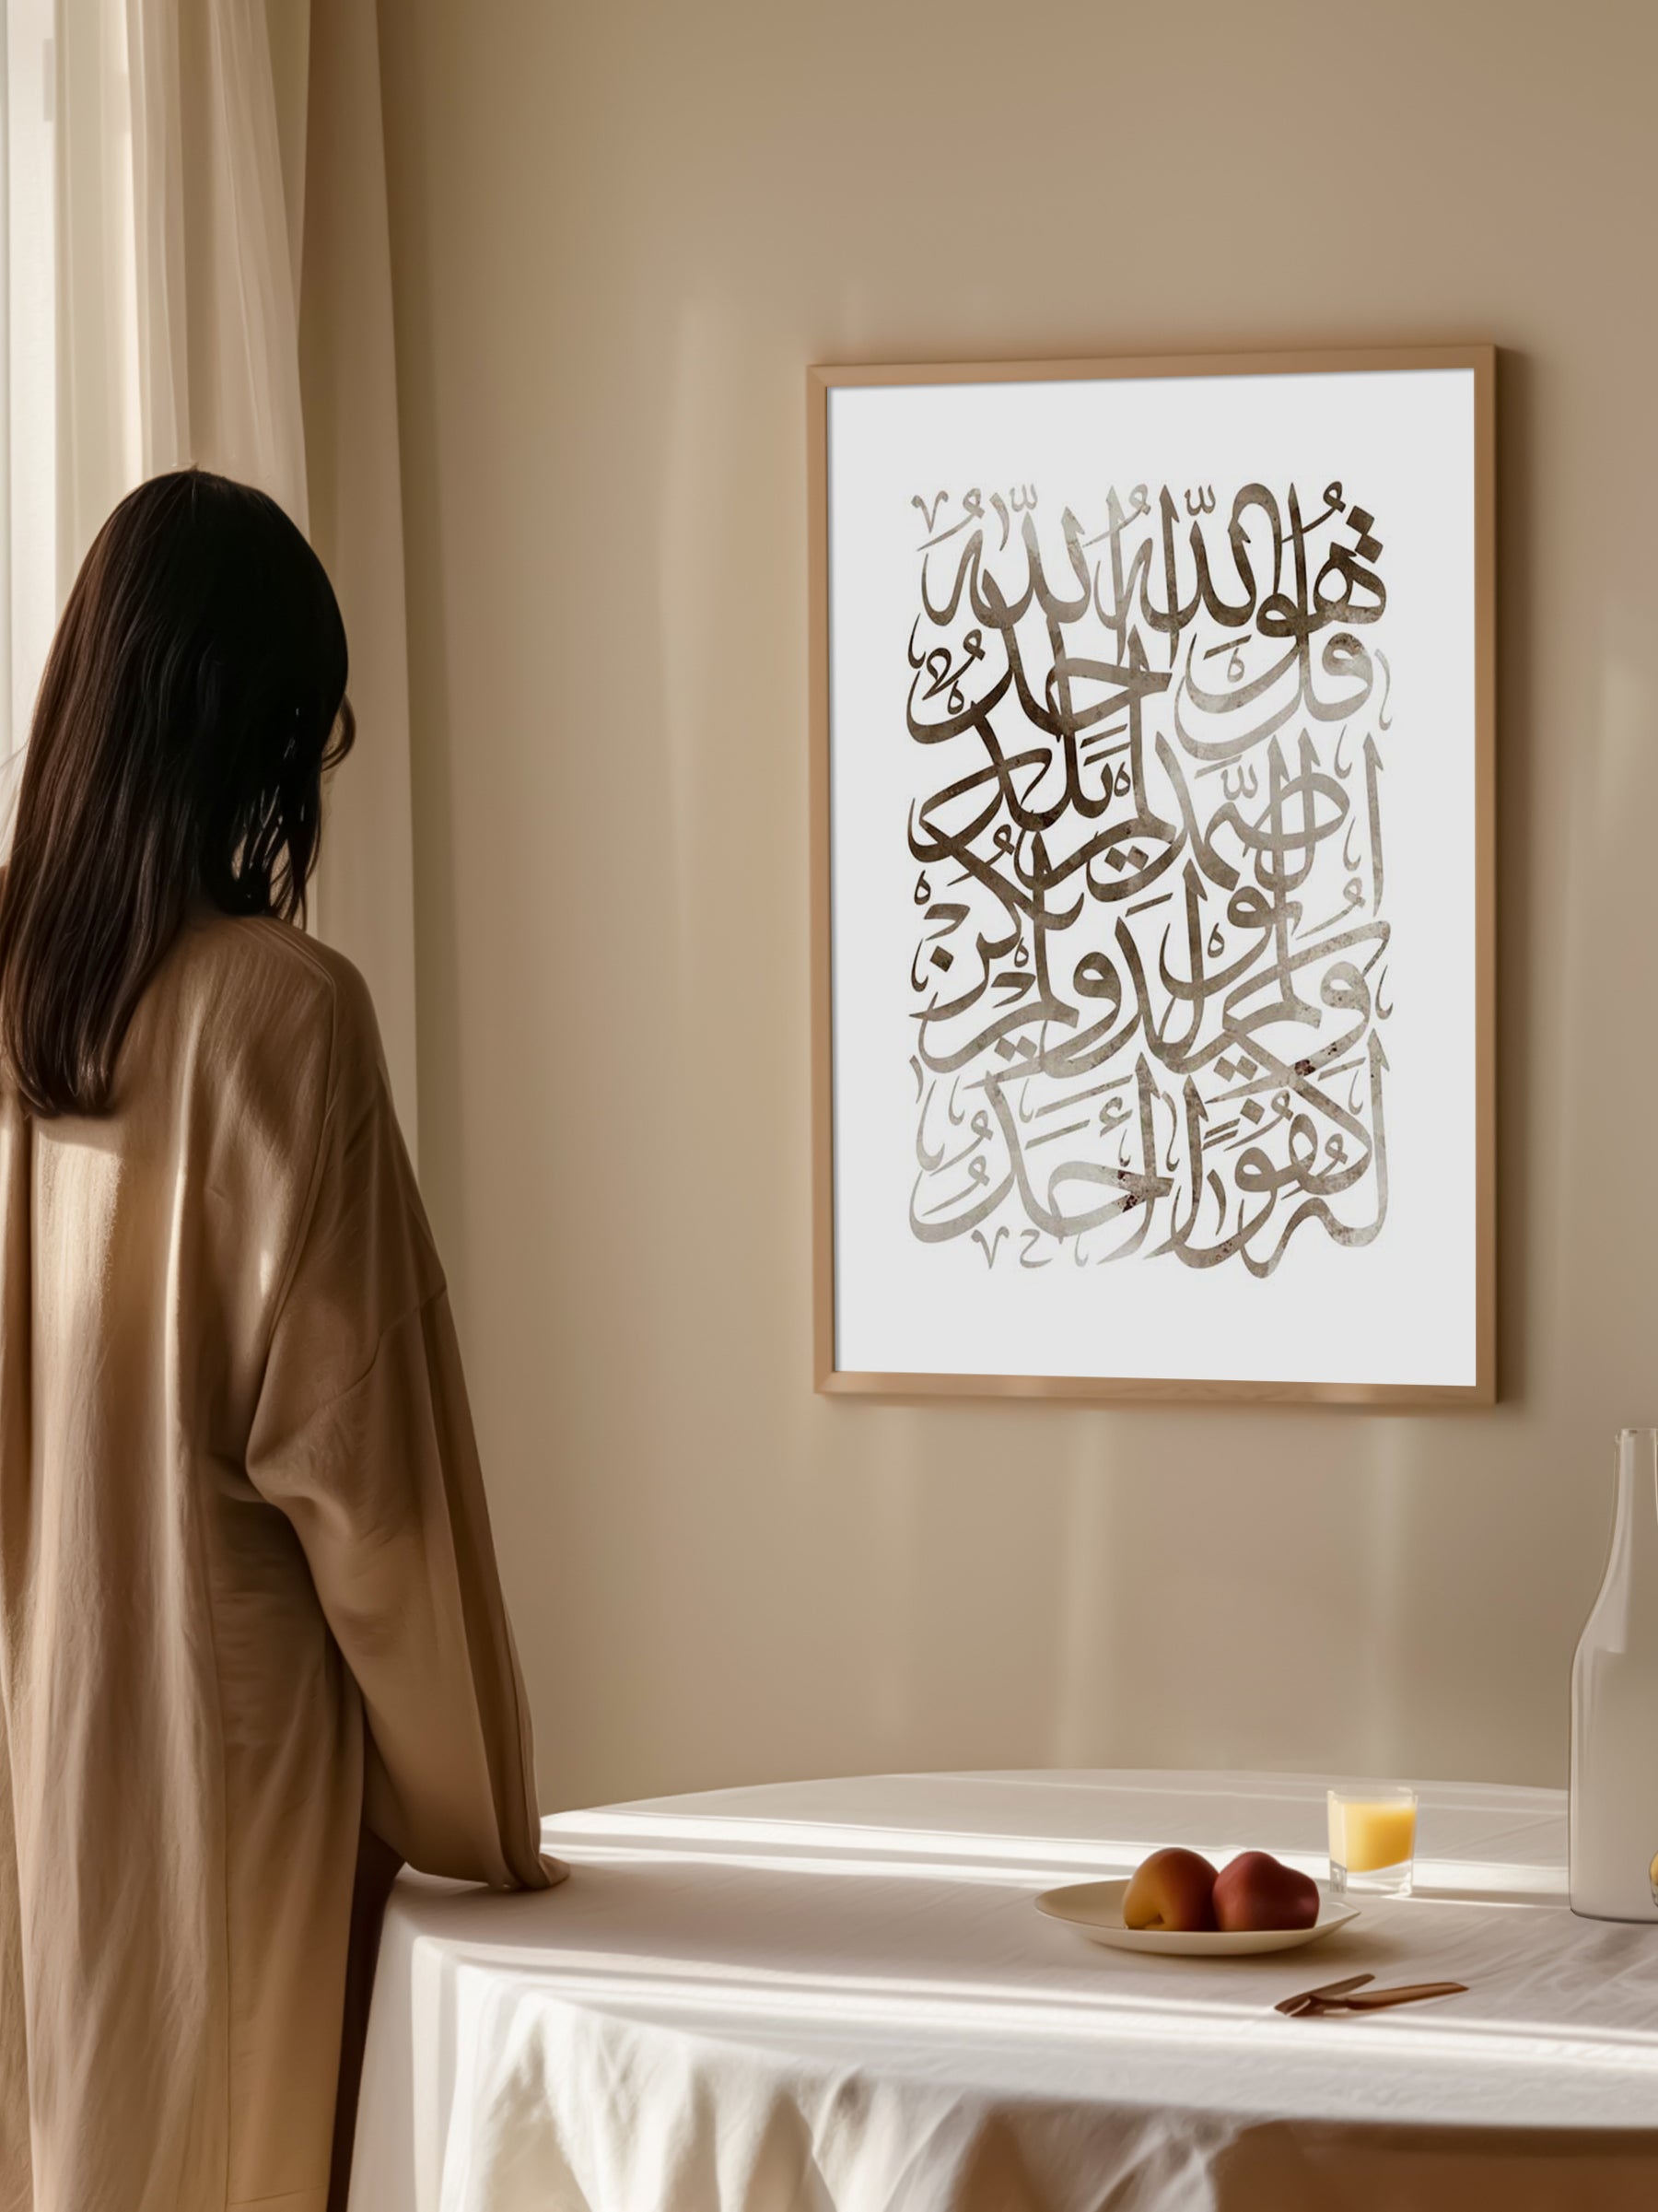 Sura-Ikhlas Calligraphy Poster